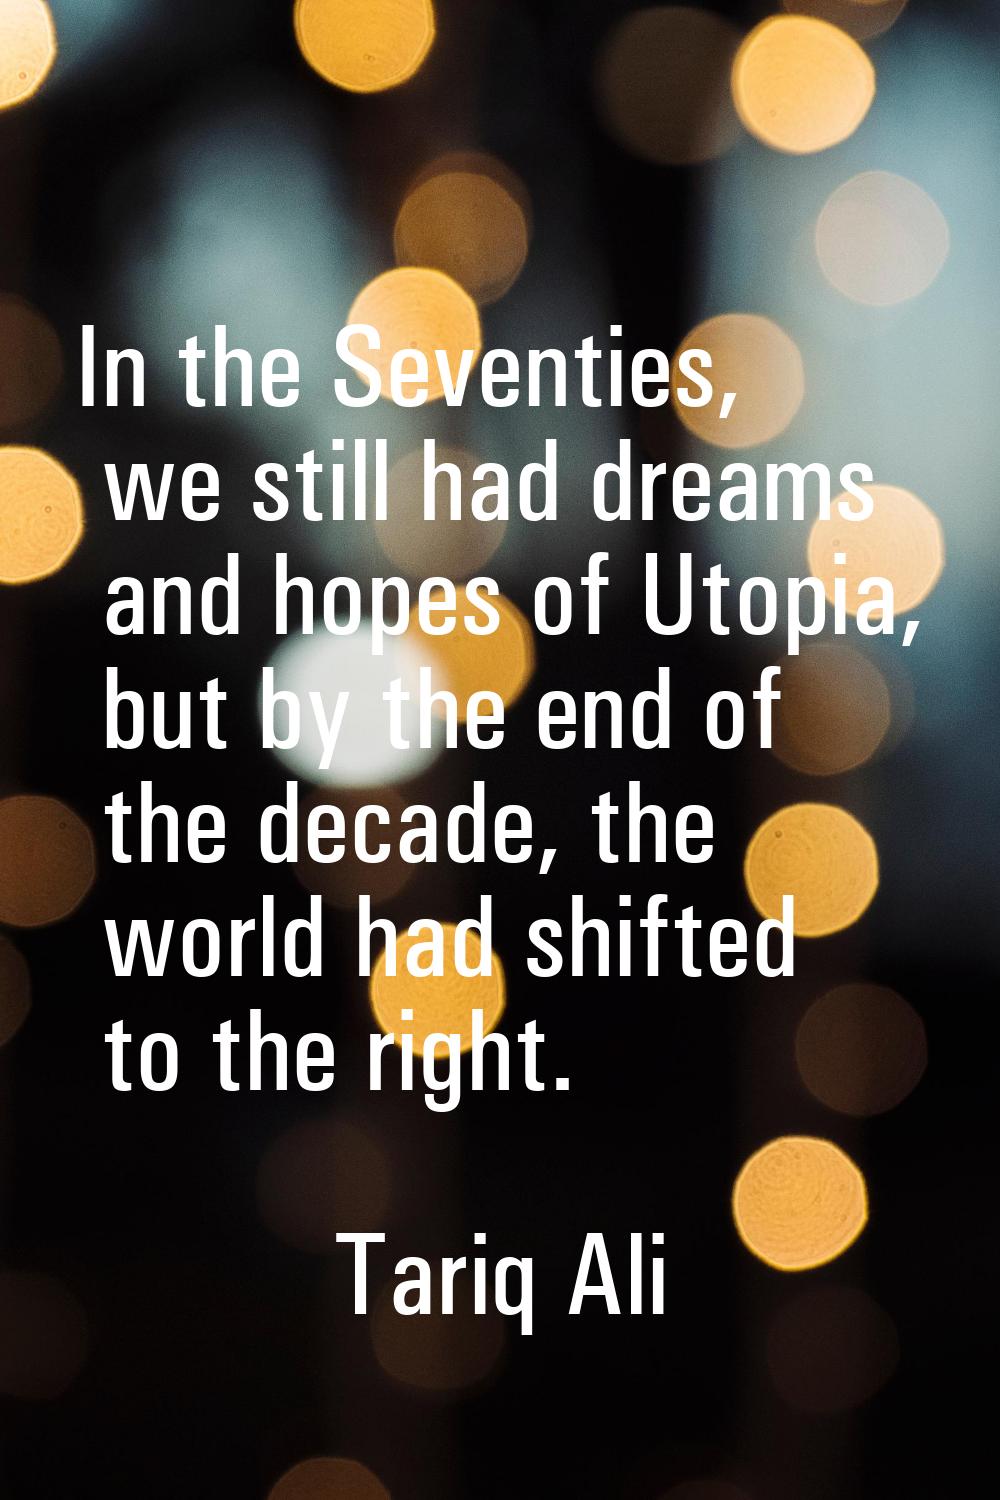 In the Seventies, we still had dreams and hopes of Utopia, but by the end of the decade, the world 